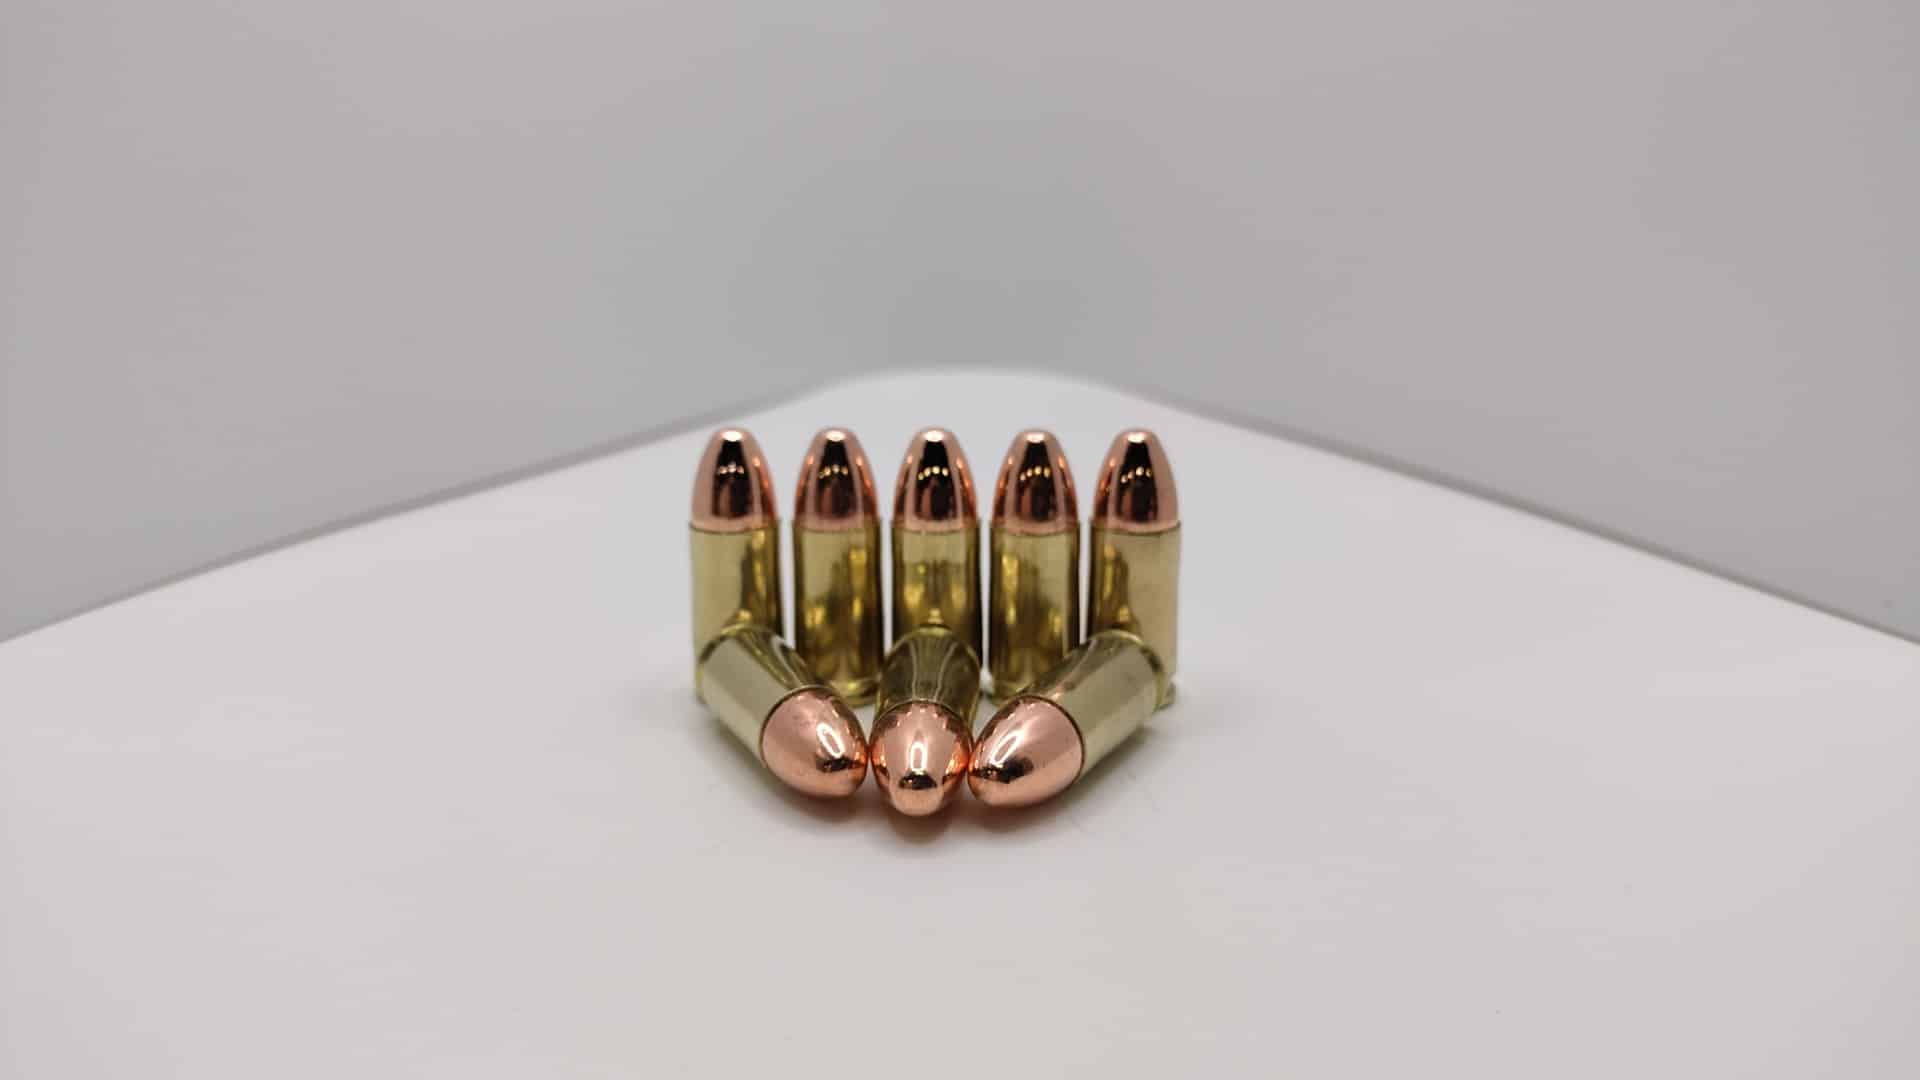 9mm Luger, 115 grain RN (Round Nose), REMAN, 1000 Rounds Bulk -MADE IN ...